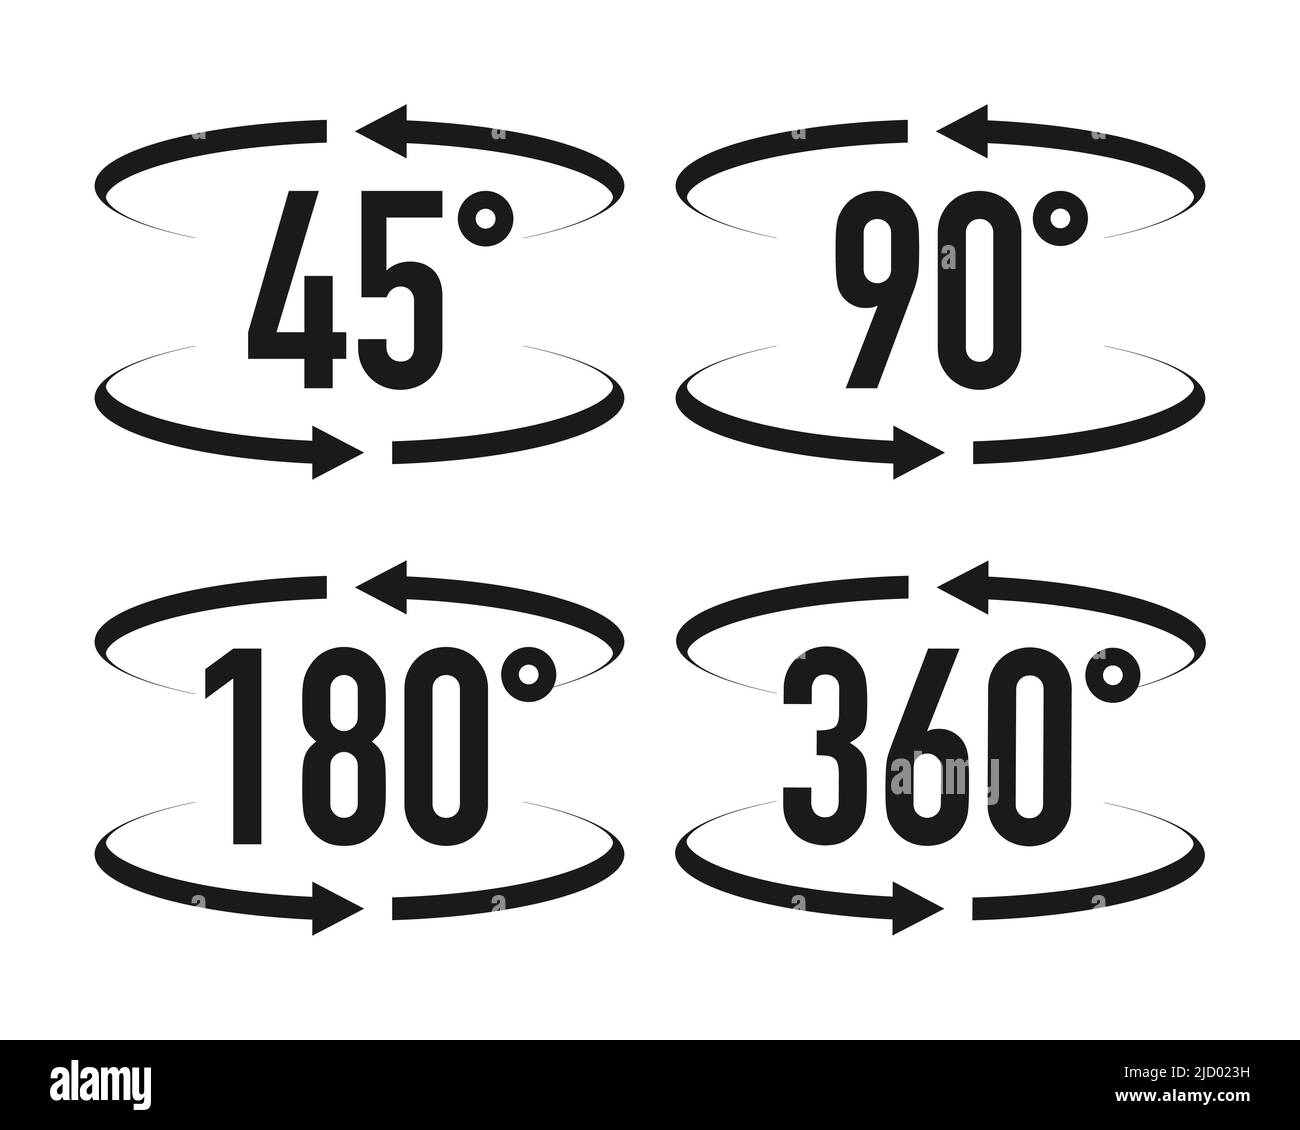 Signs with arrows to indicate the rotation or panoramas to 45, 90, 180 and 360 degrees. Vector illustration. Stock Vector